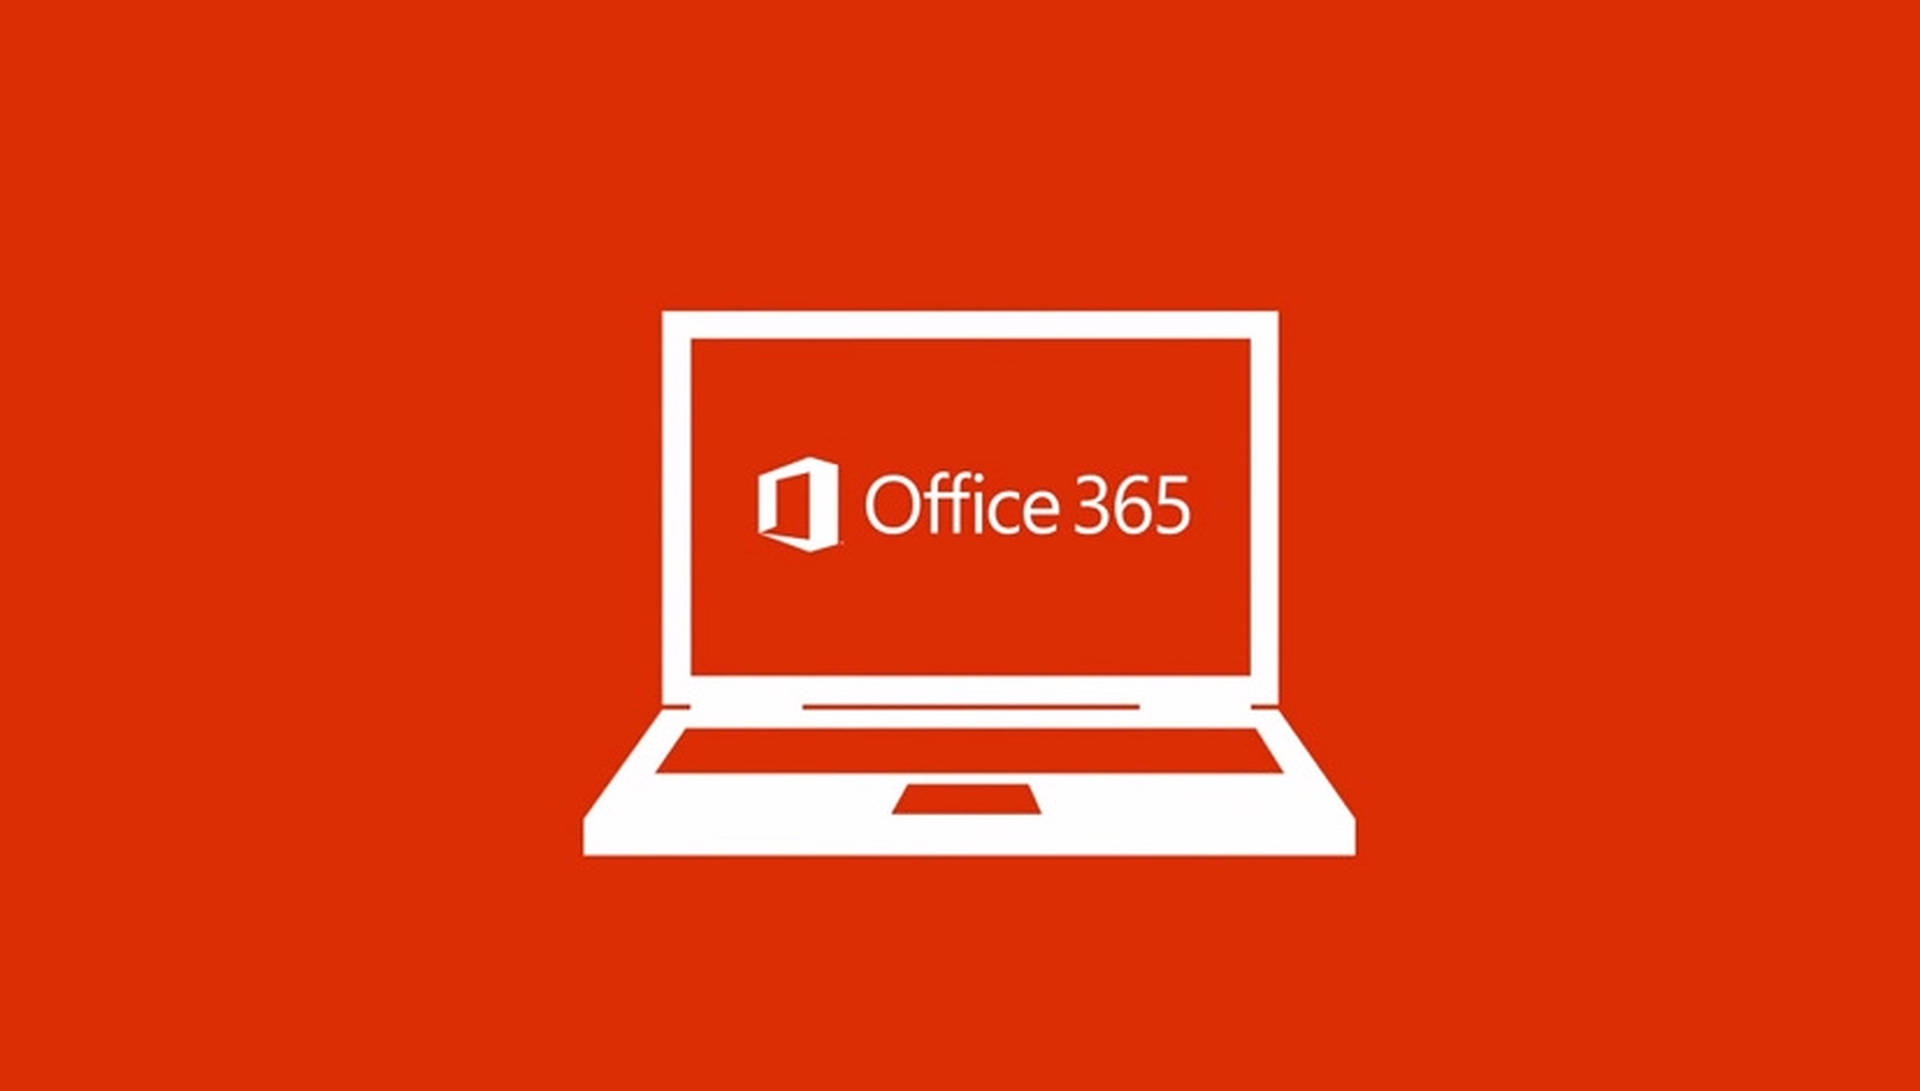 Office 365 Wallpapers